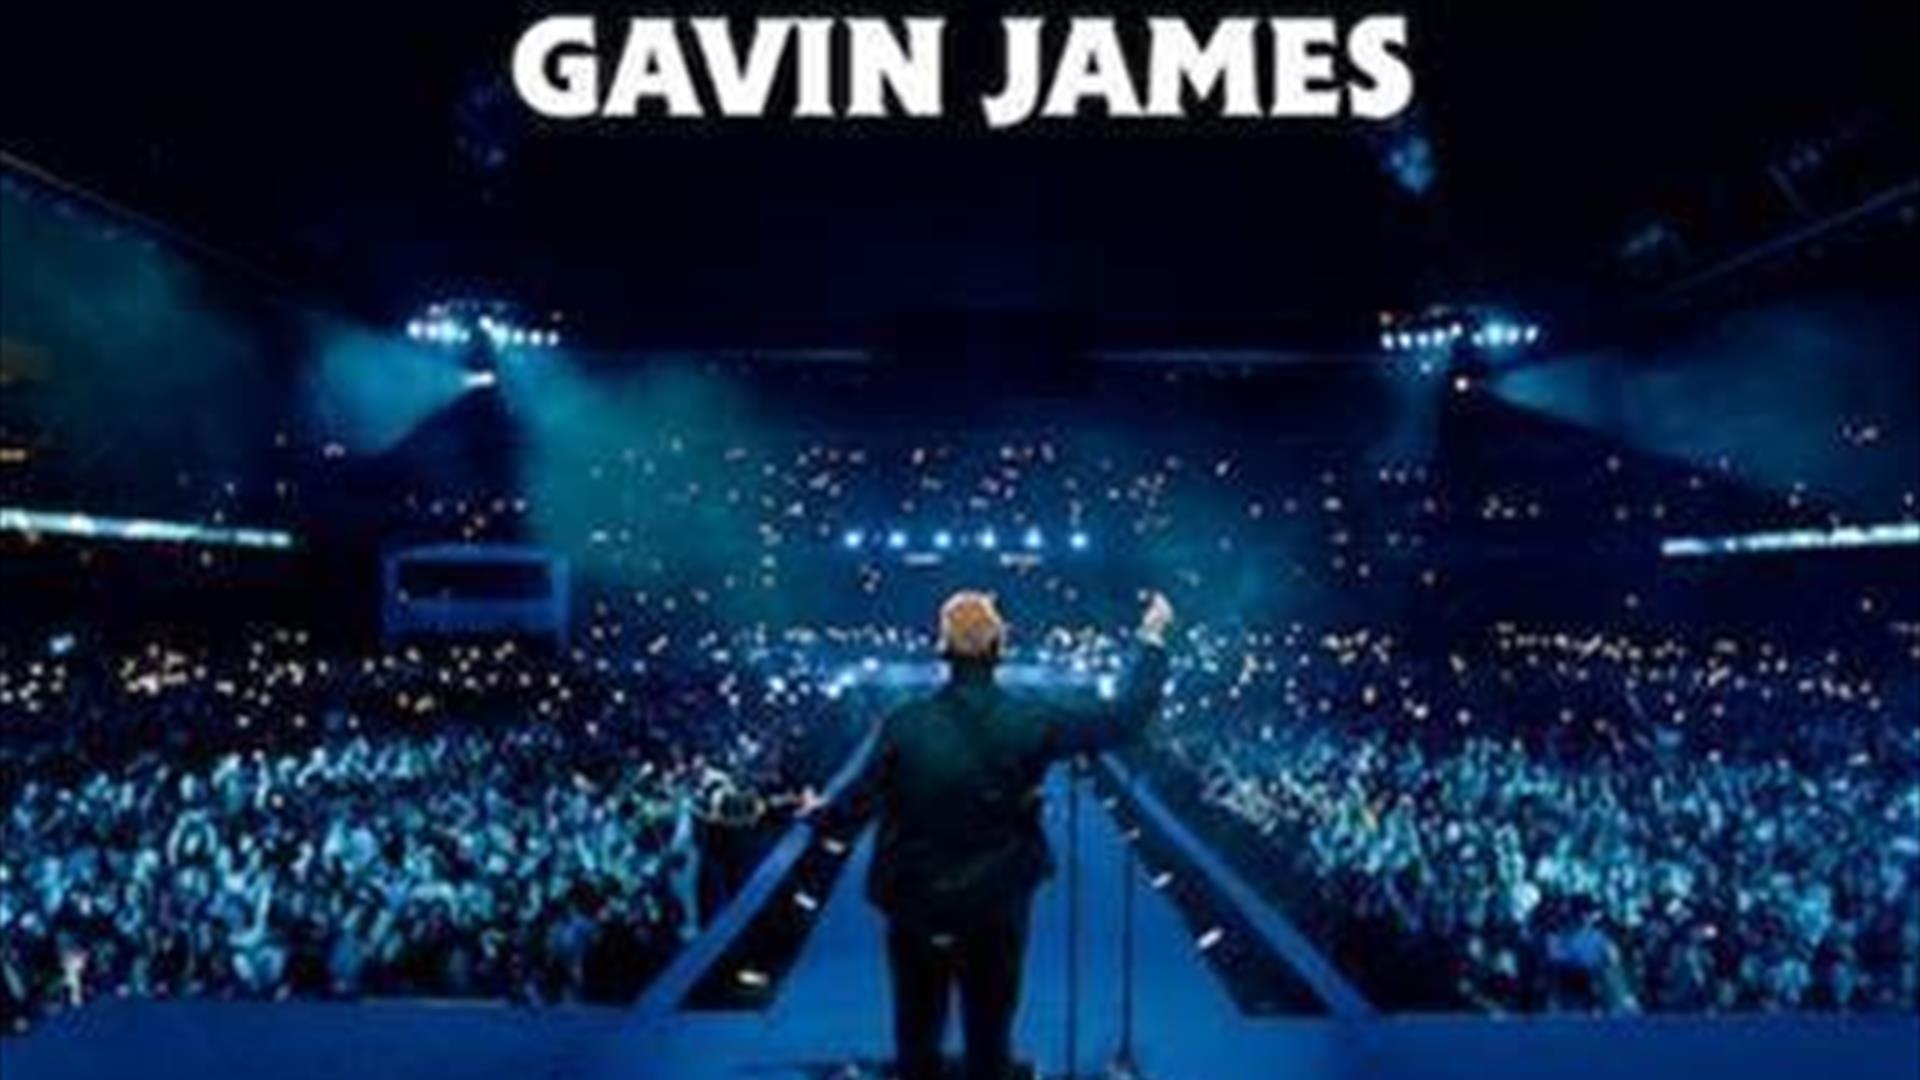 Gavin James facing a full arena, phone torches shining, blue mood lighting. White text above states 'Gavin James'.